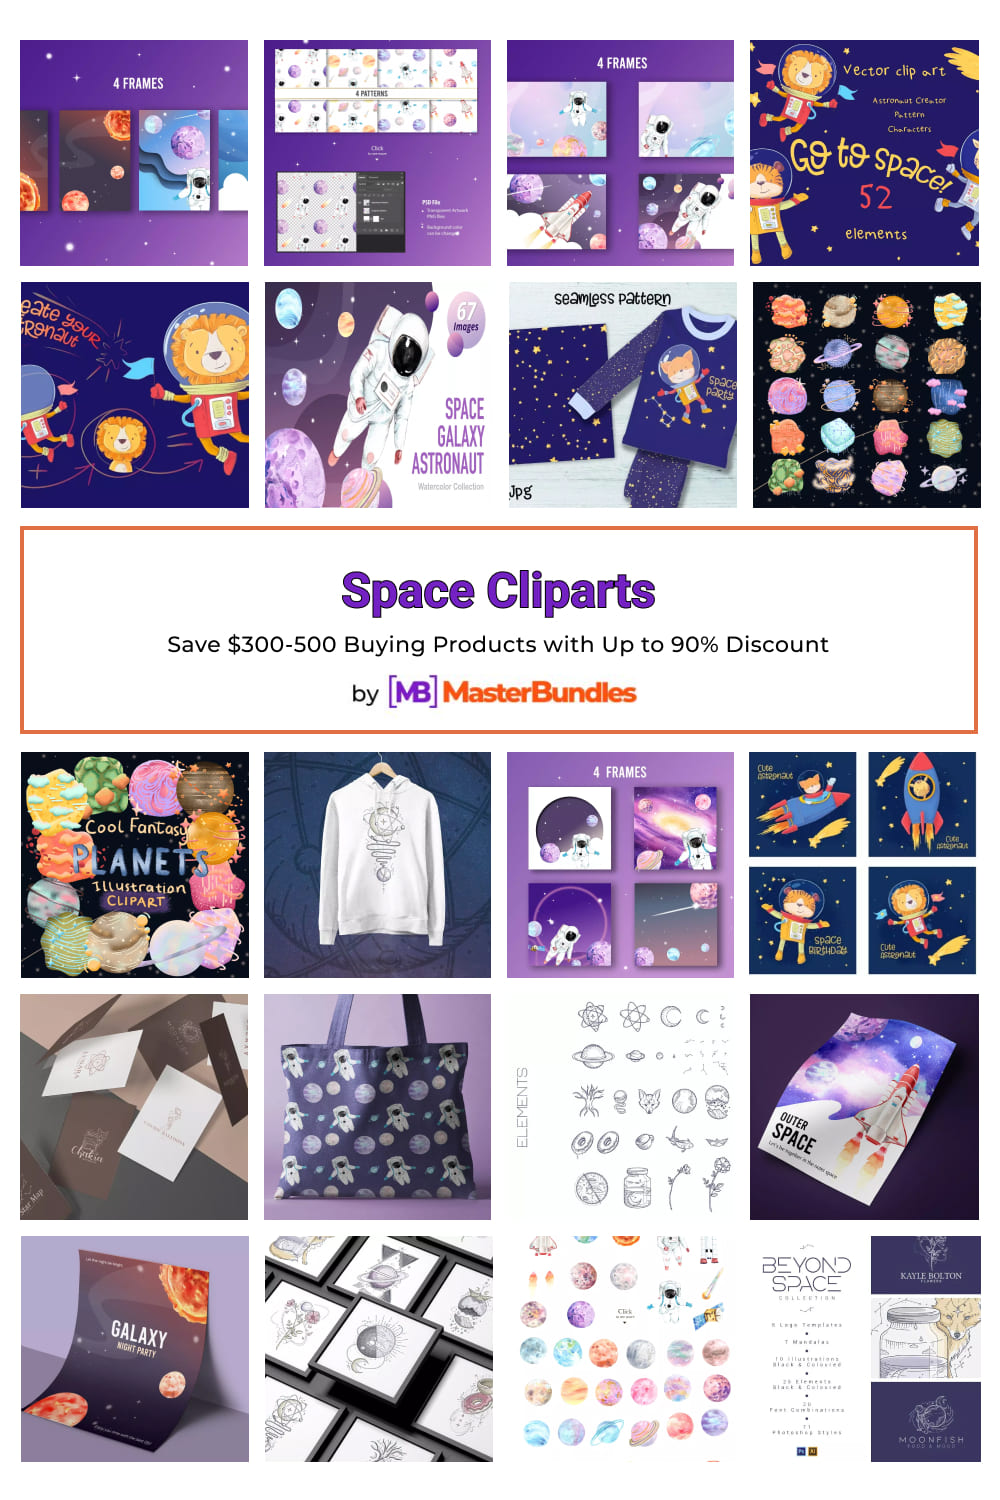 Space Cliparts for Pinterest.